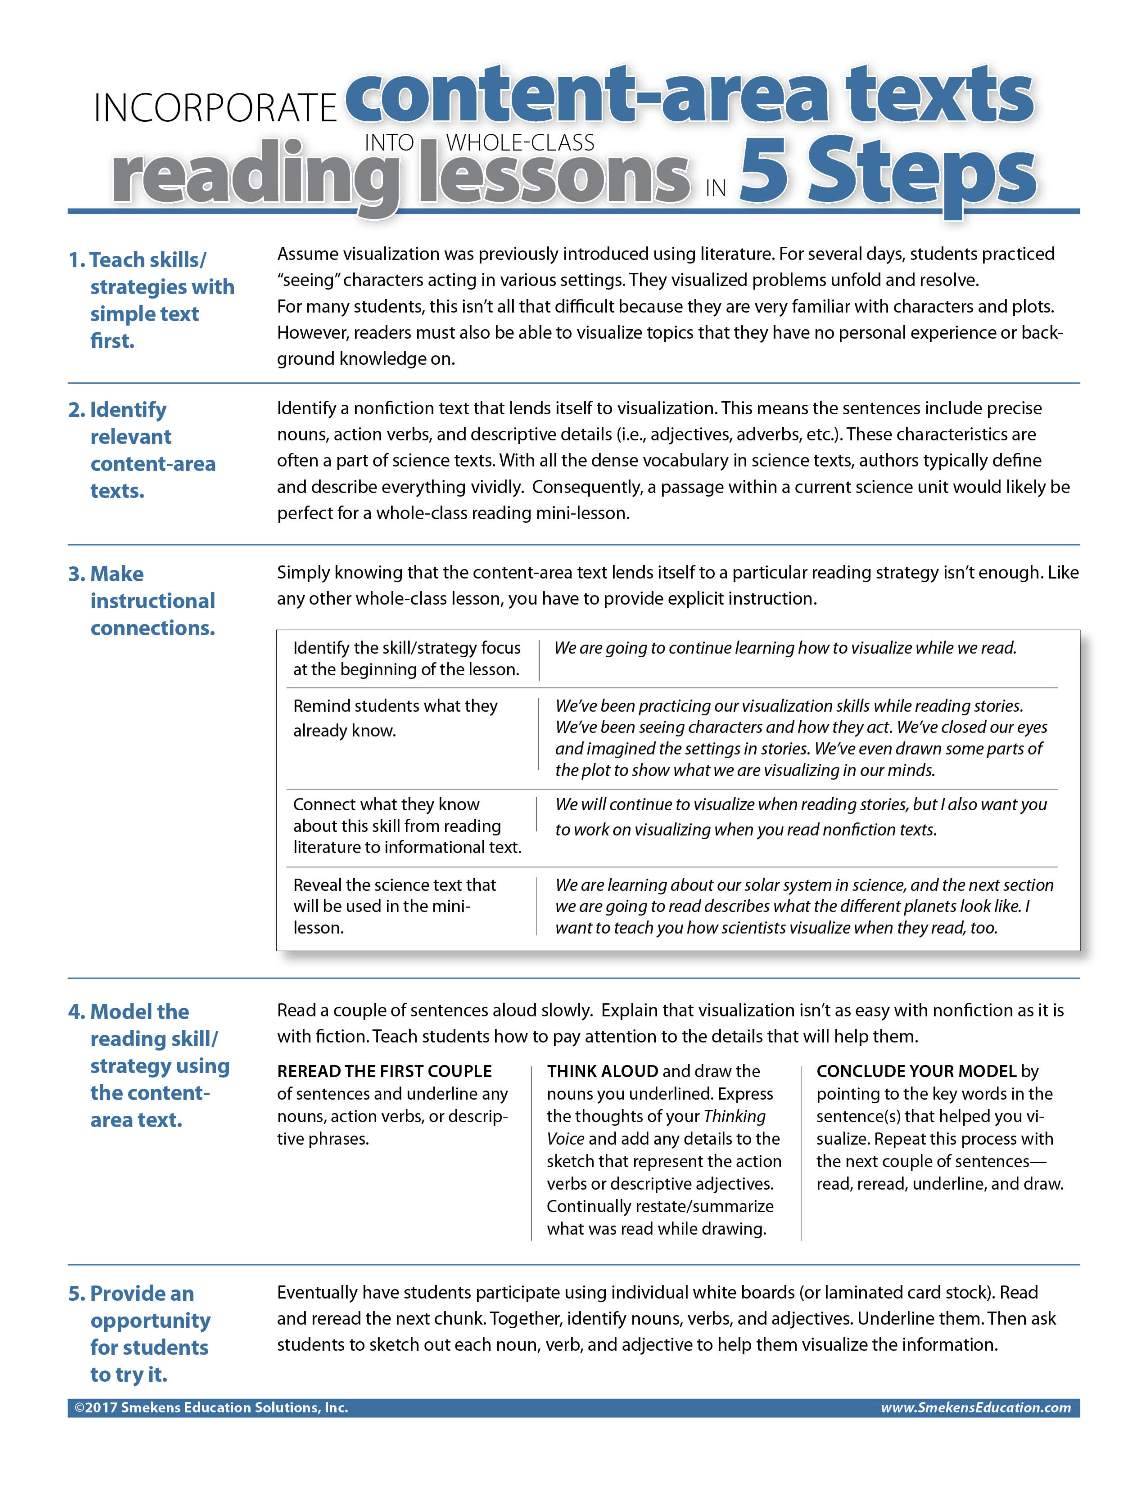 Plan Whole Class Lessons Using Content Area Text